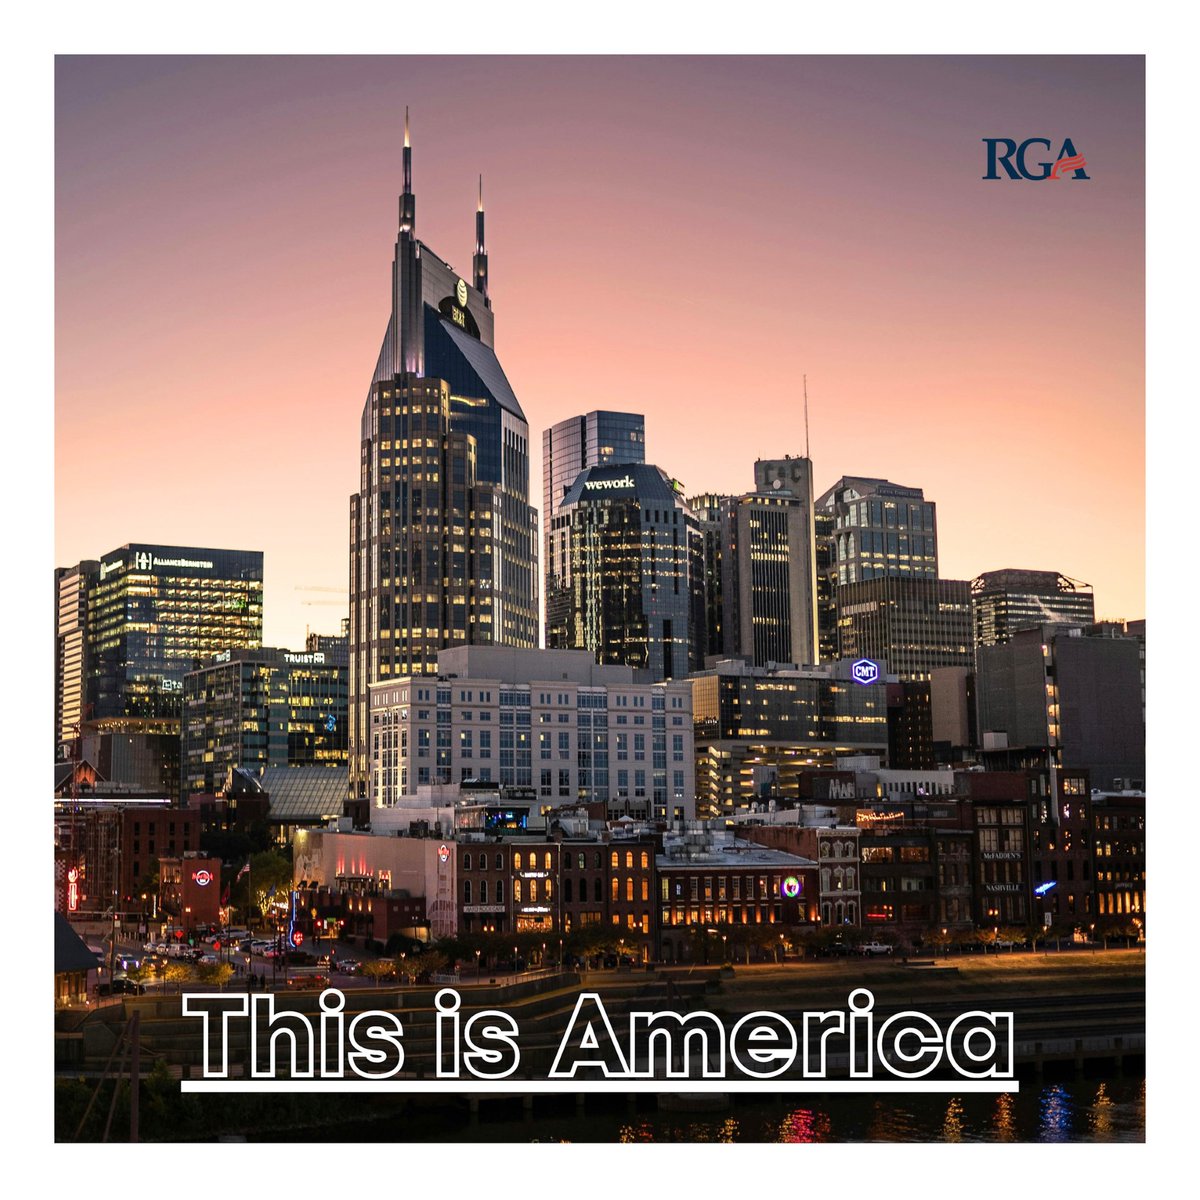 This is America! 📍Nashville, Tennessee What's your favorite country song?